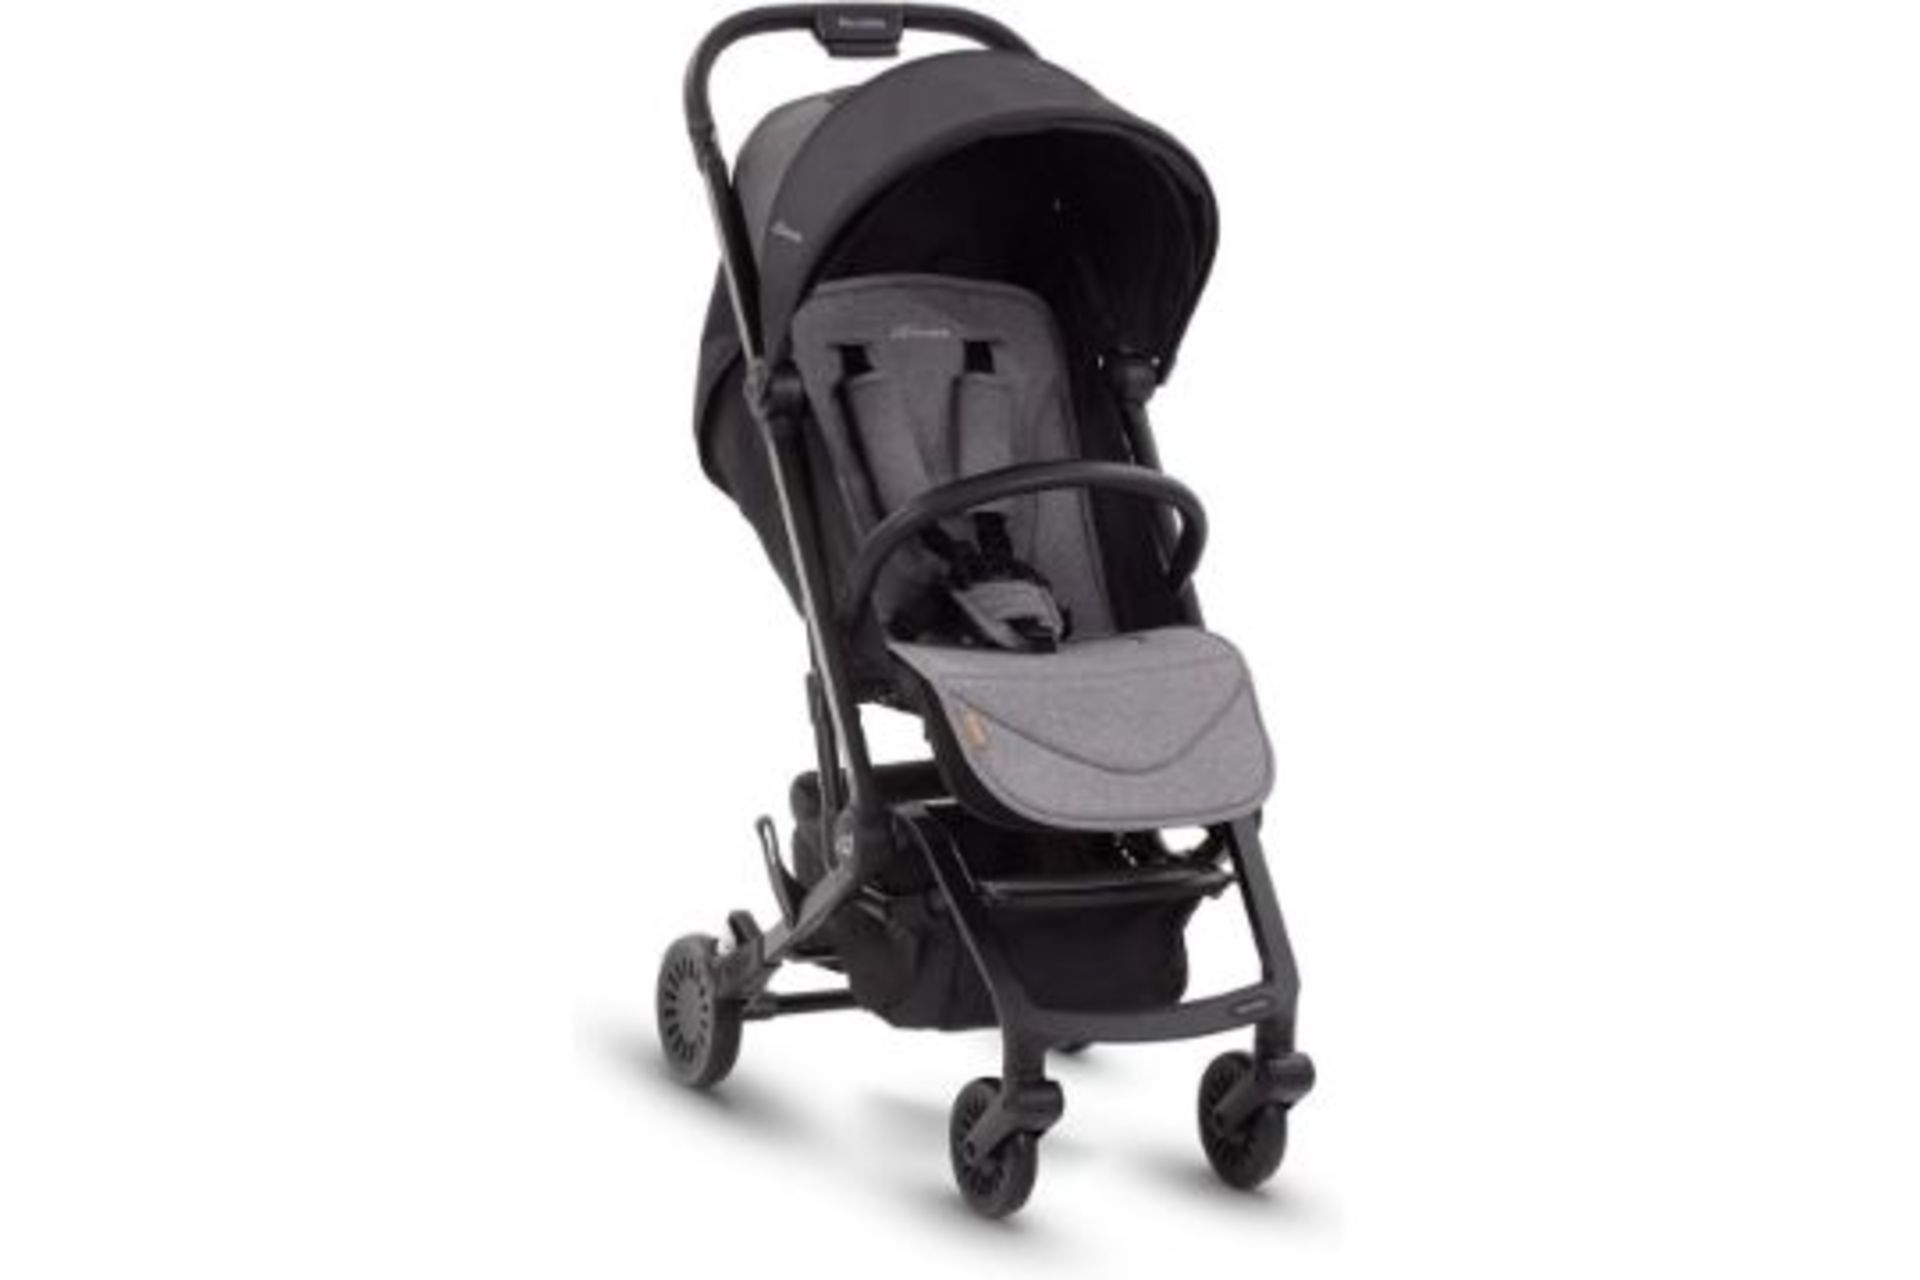 New & Boxed MICRALITE ProFold By Silver Cross Lightweight Travel Stroller with Compact Fold,